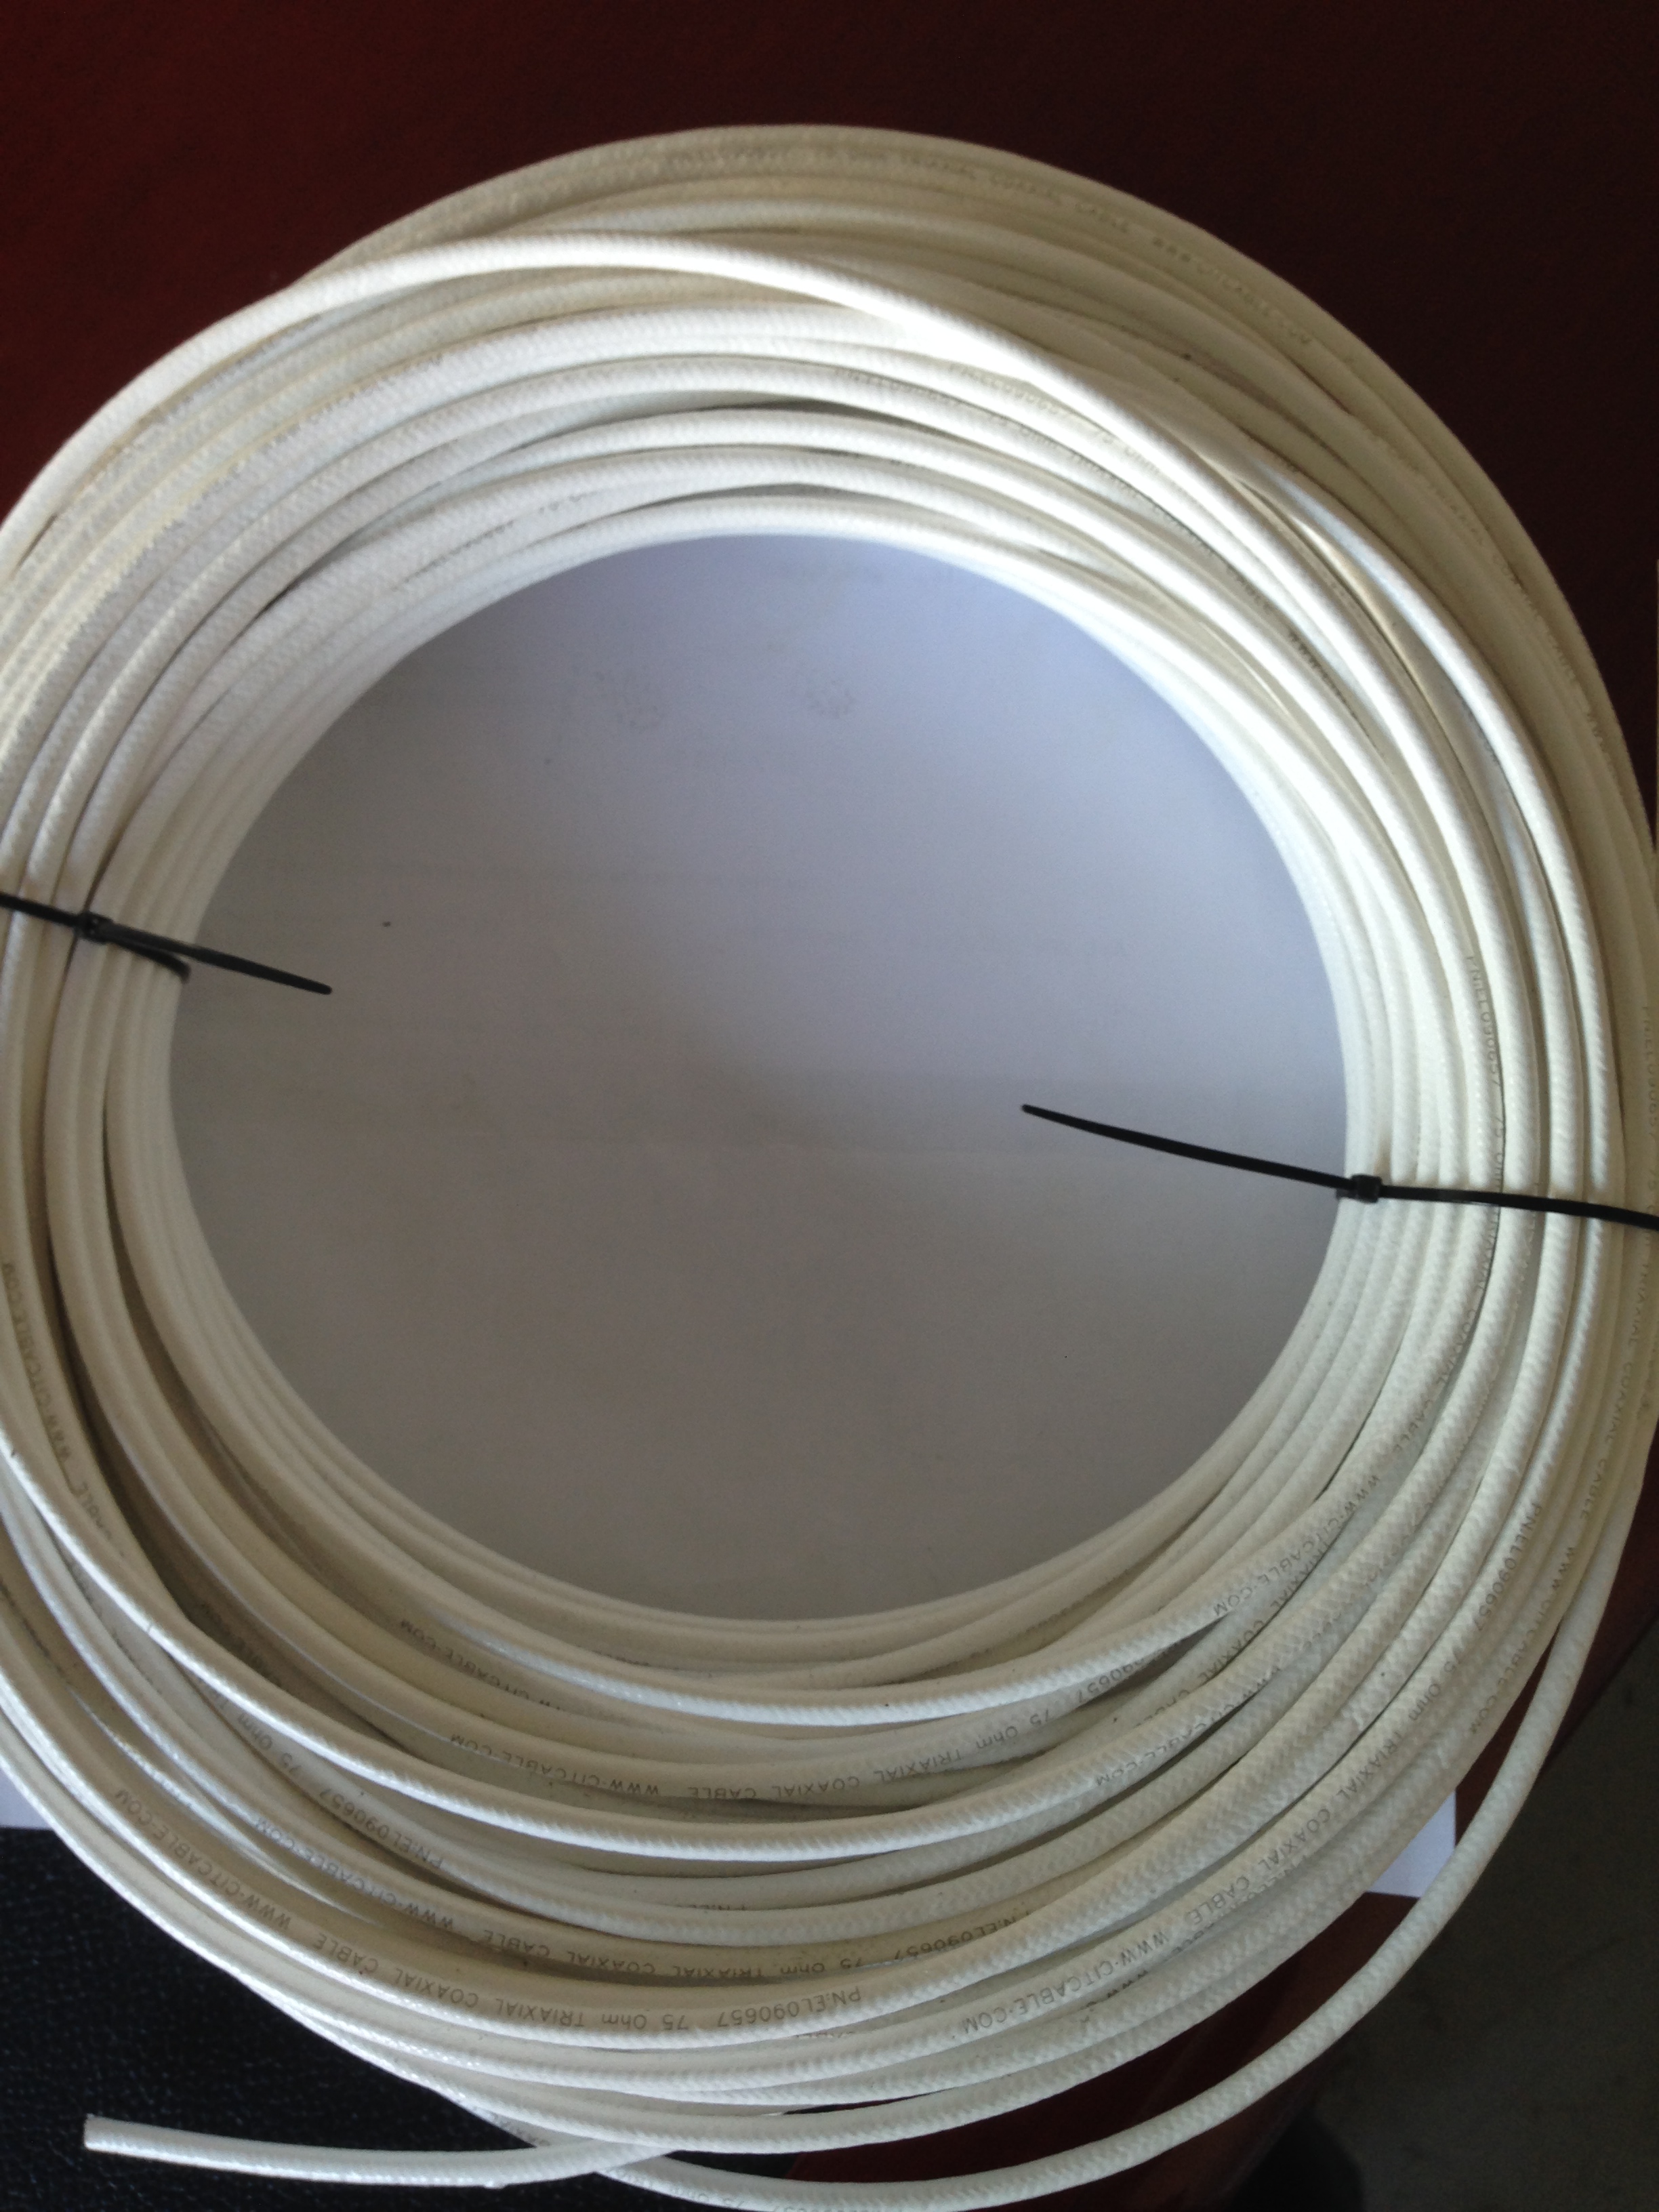 High Temperature low noise Triaxial Cable,Triaxial Cable low noise, low noise Triaxial Cable, Radiation resistant Low Noise Coaxial Cable 